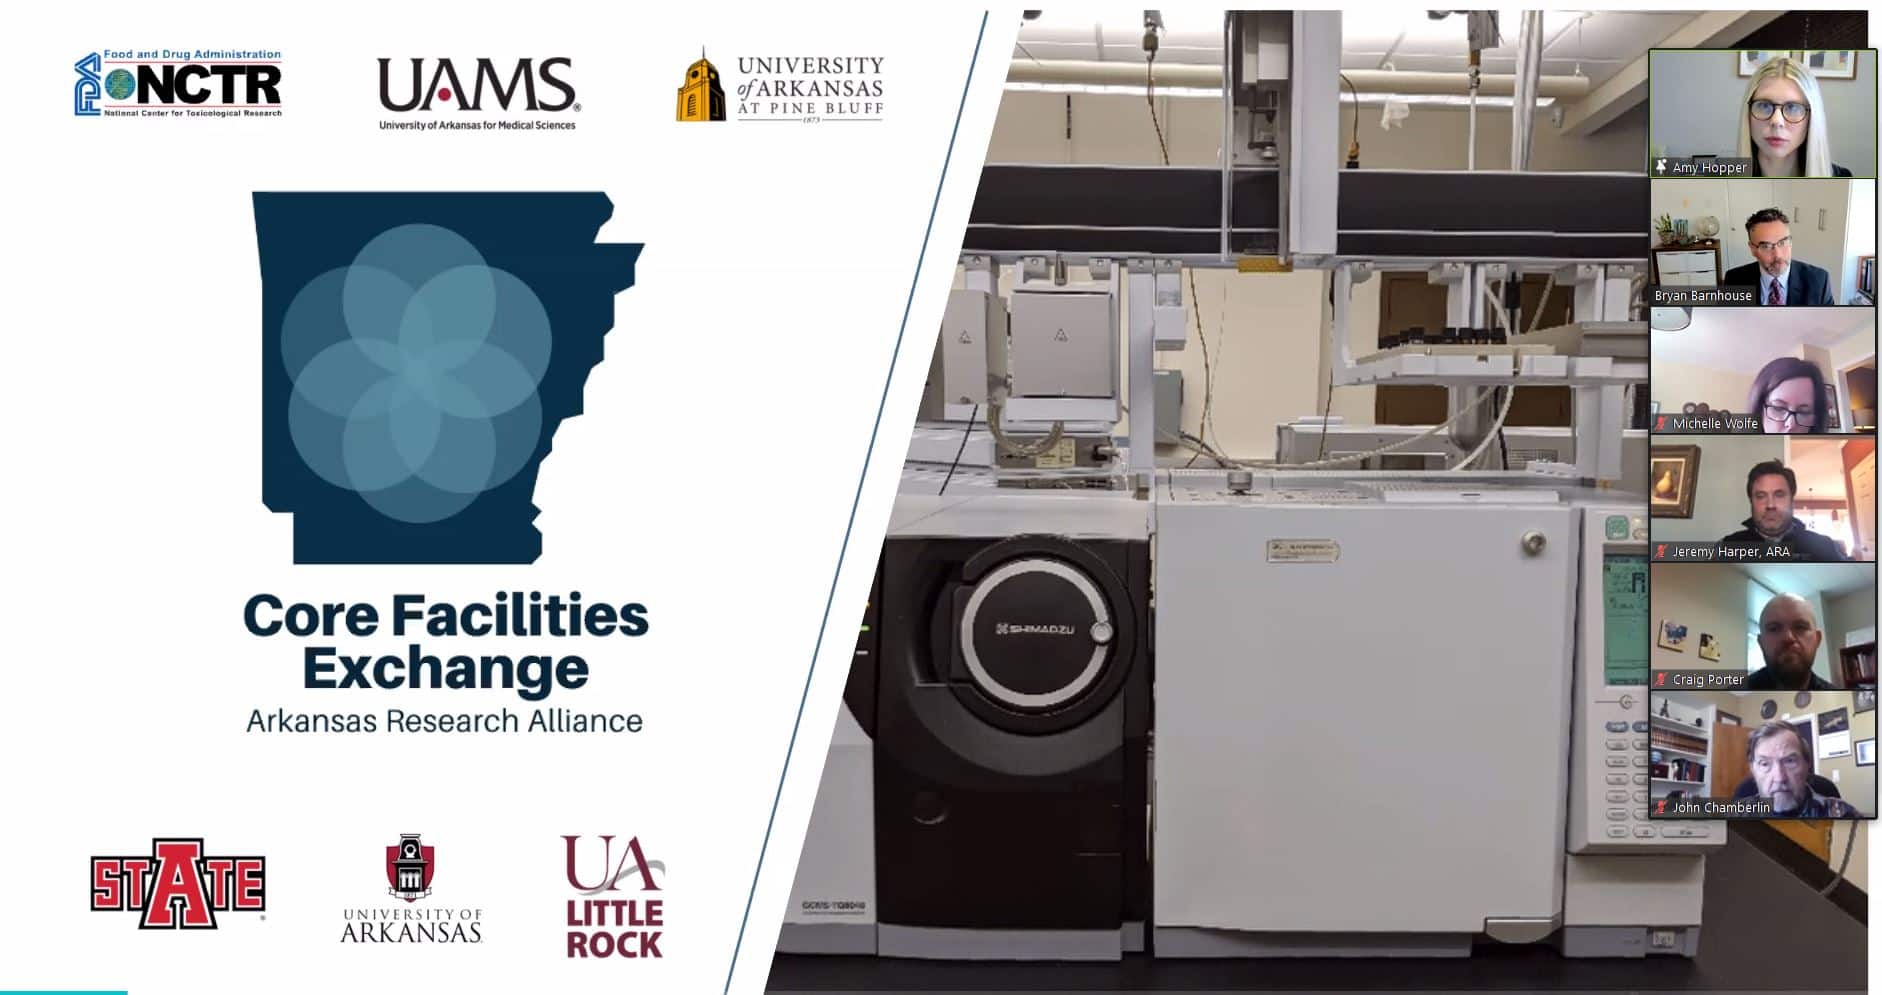 The Core Facilities Exchange (CFE) allows researchers across Arkansas to share resources and equipment.